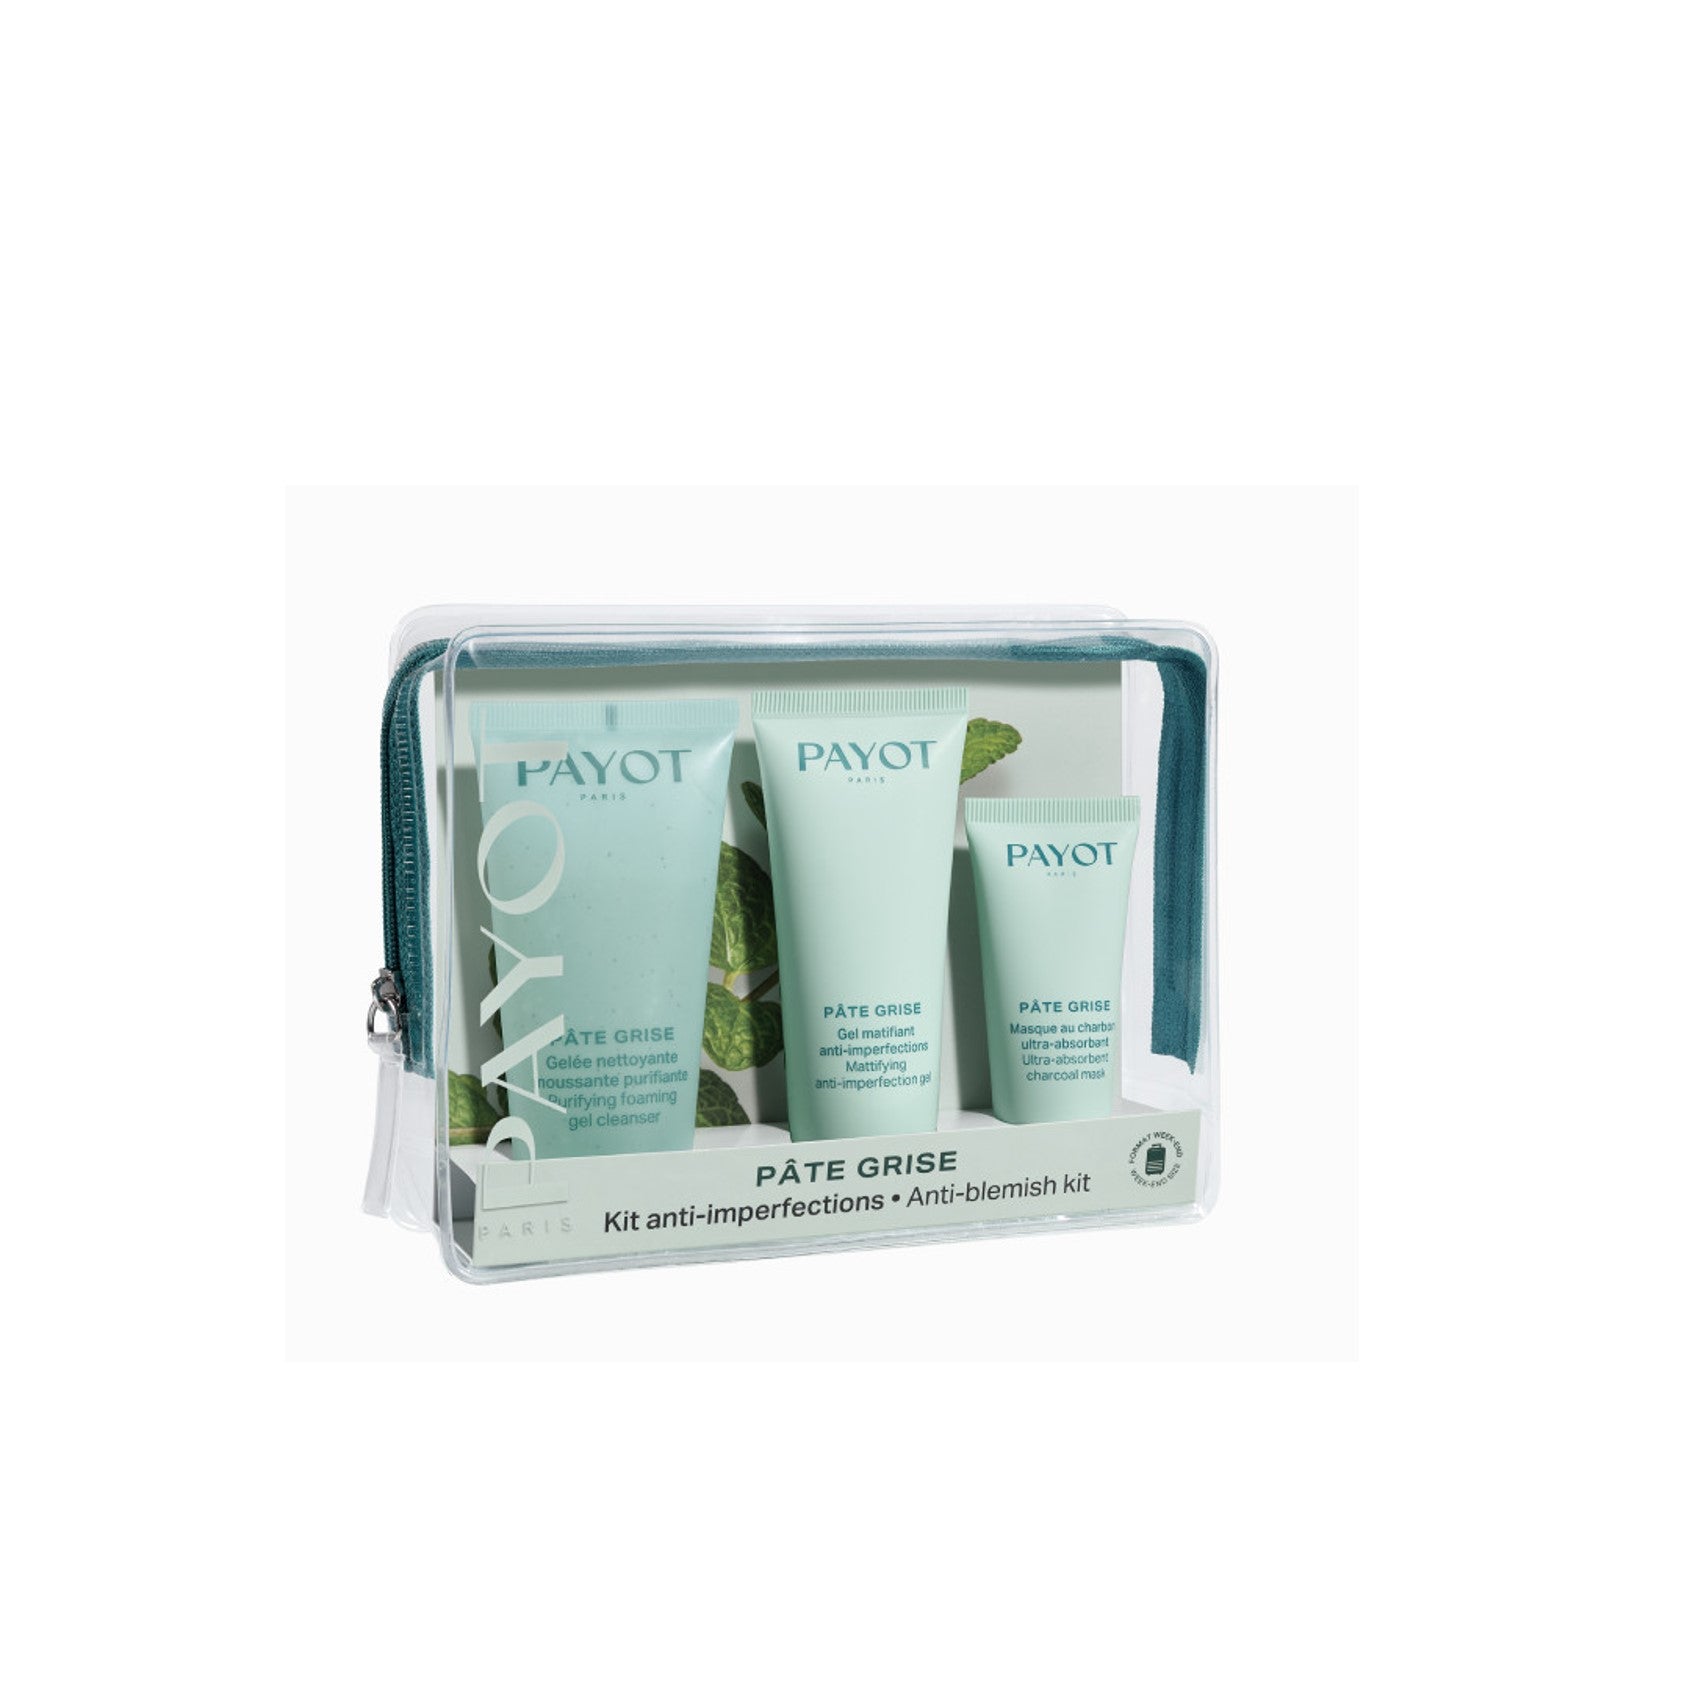 Payot Pate Grise Gift Set- Lillys Pharmacy and Health Store